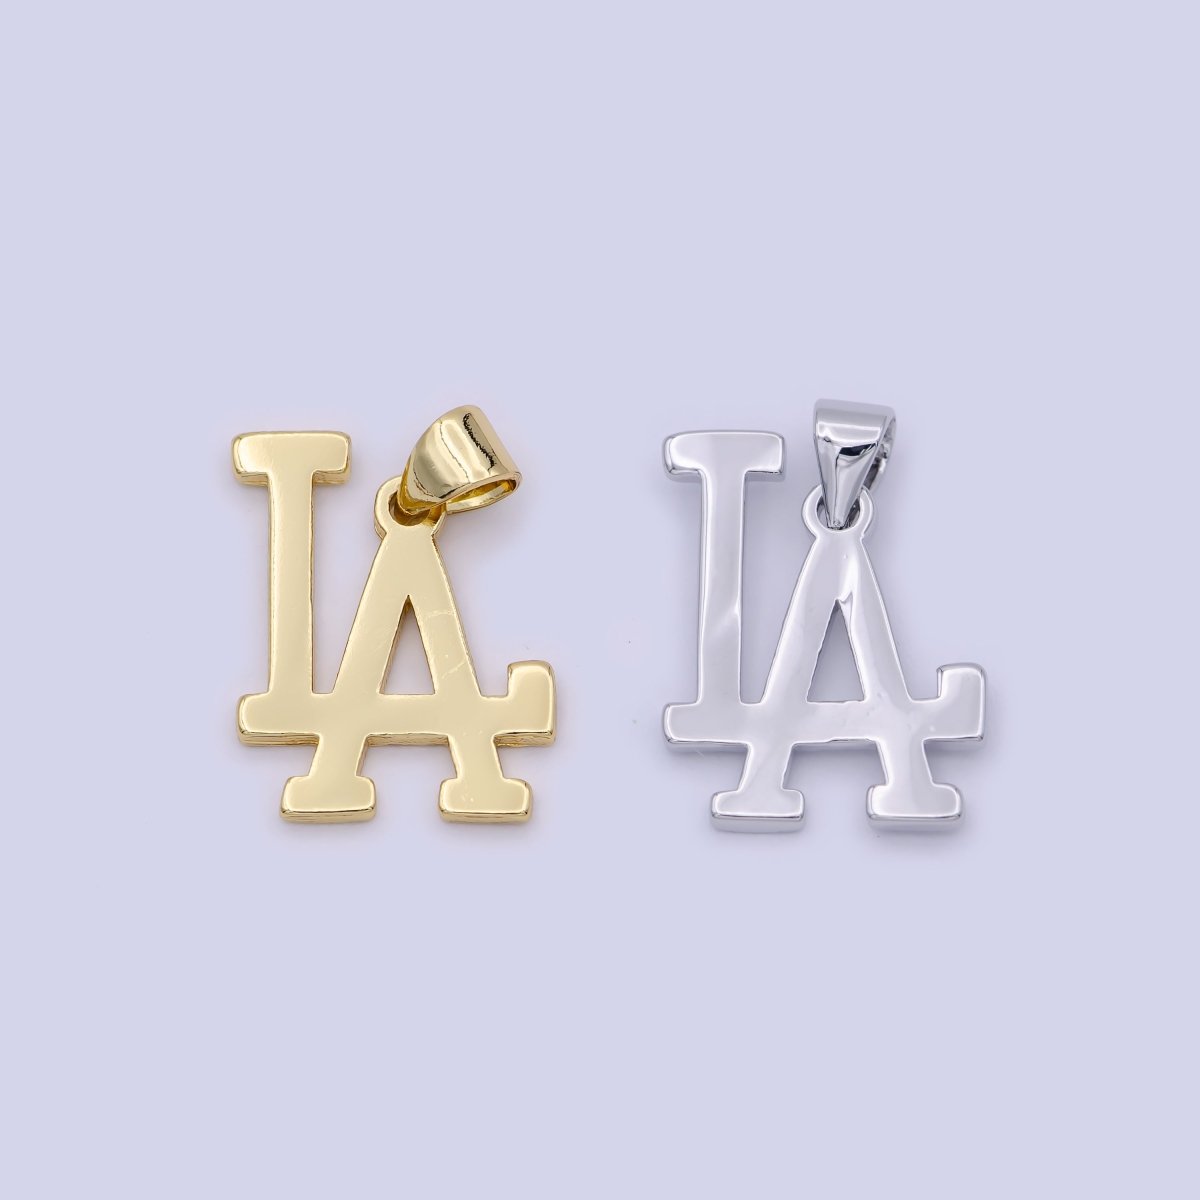 LA Dodgers Charm Necklace | Los Angeles Pendant | So Cal | LA Gifts For Her Him | LA Dodgers Initial | Silver Baseball Charm H-481 H-482 - DLUXCA